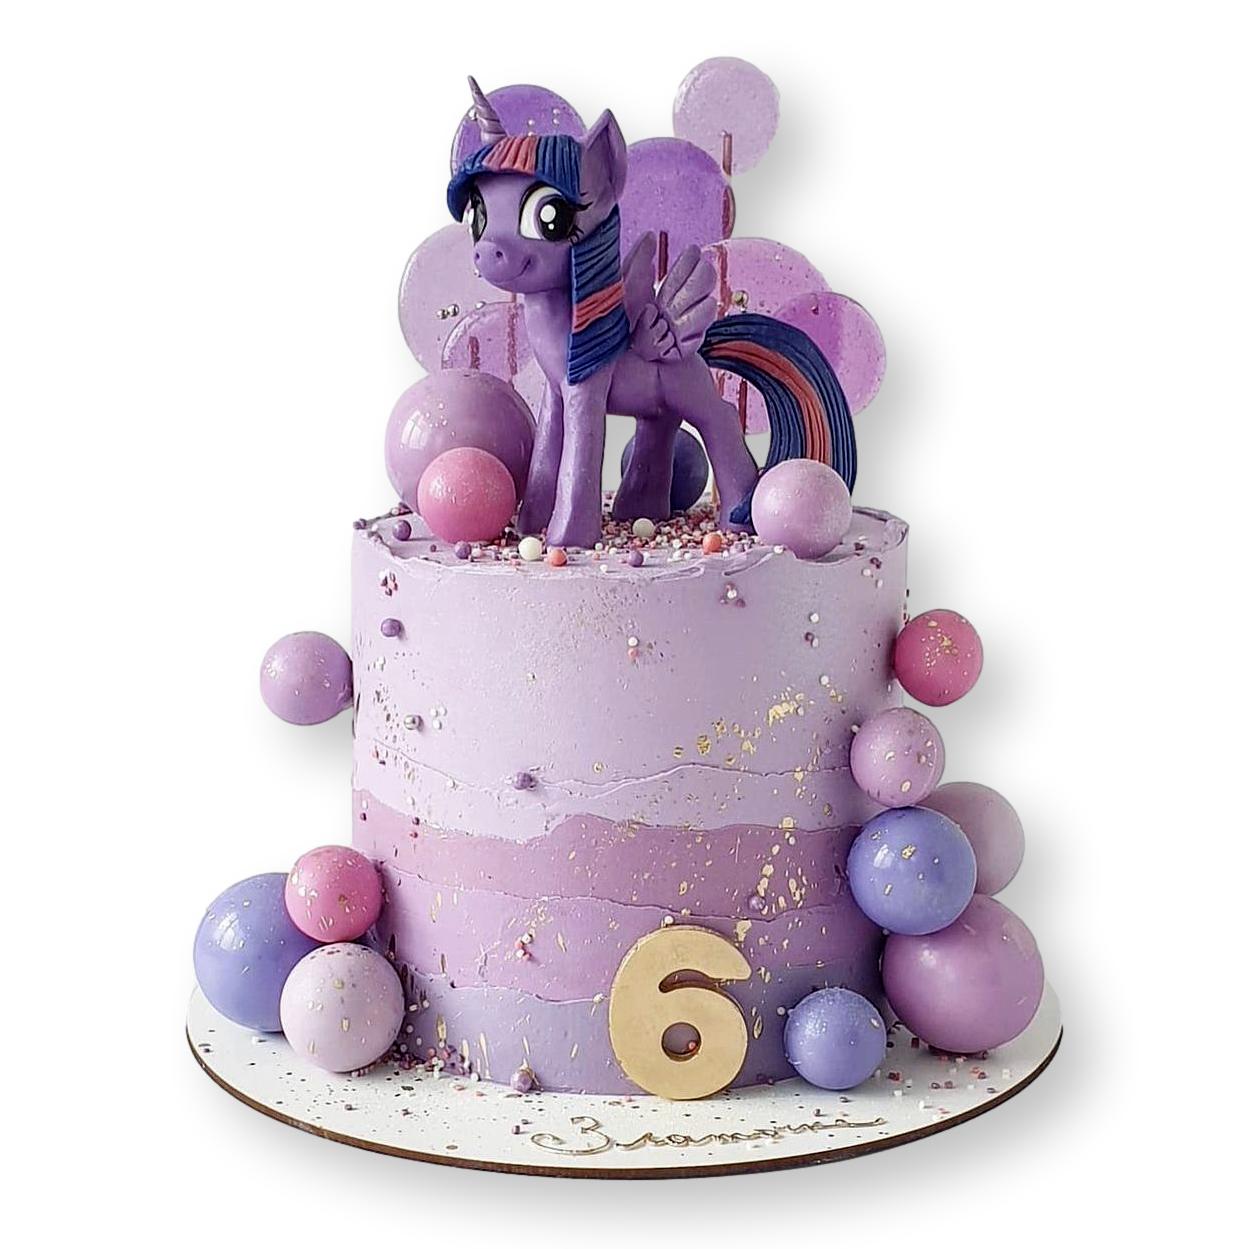 Little Pony Cake - 1111 – Cakes and Memories Bakeshop